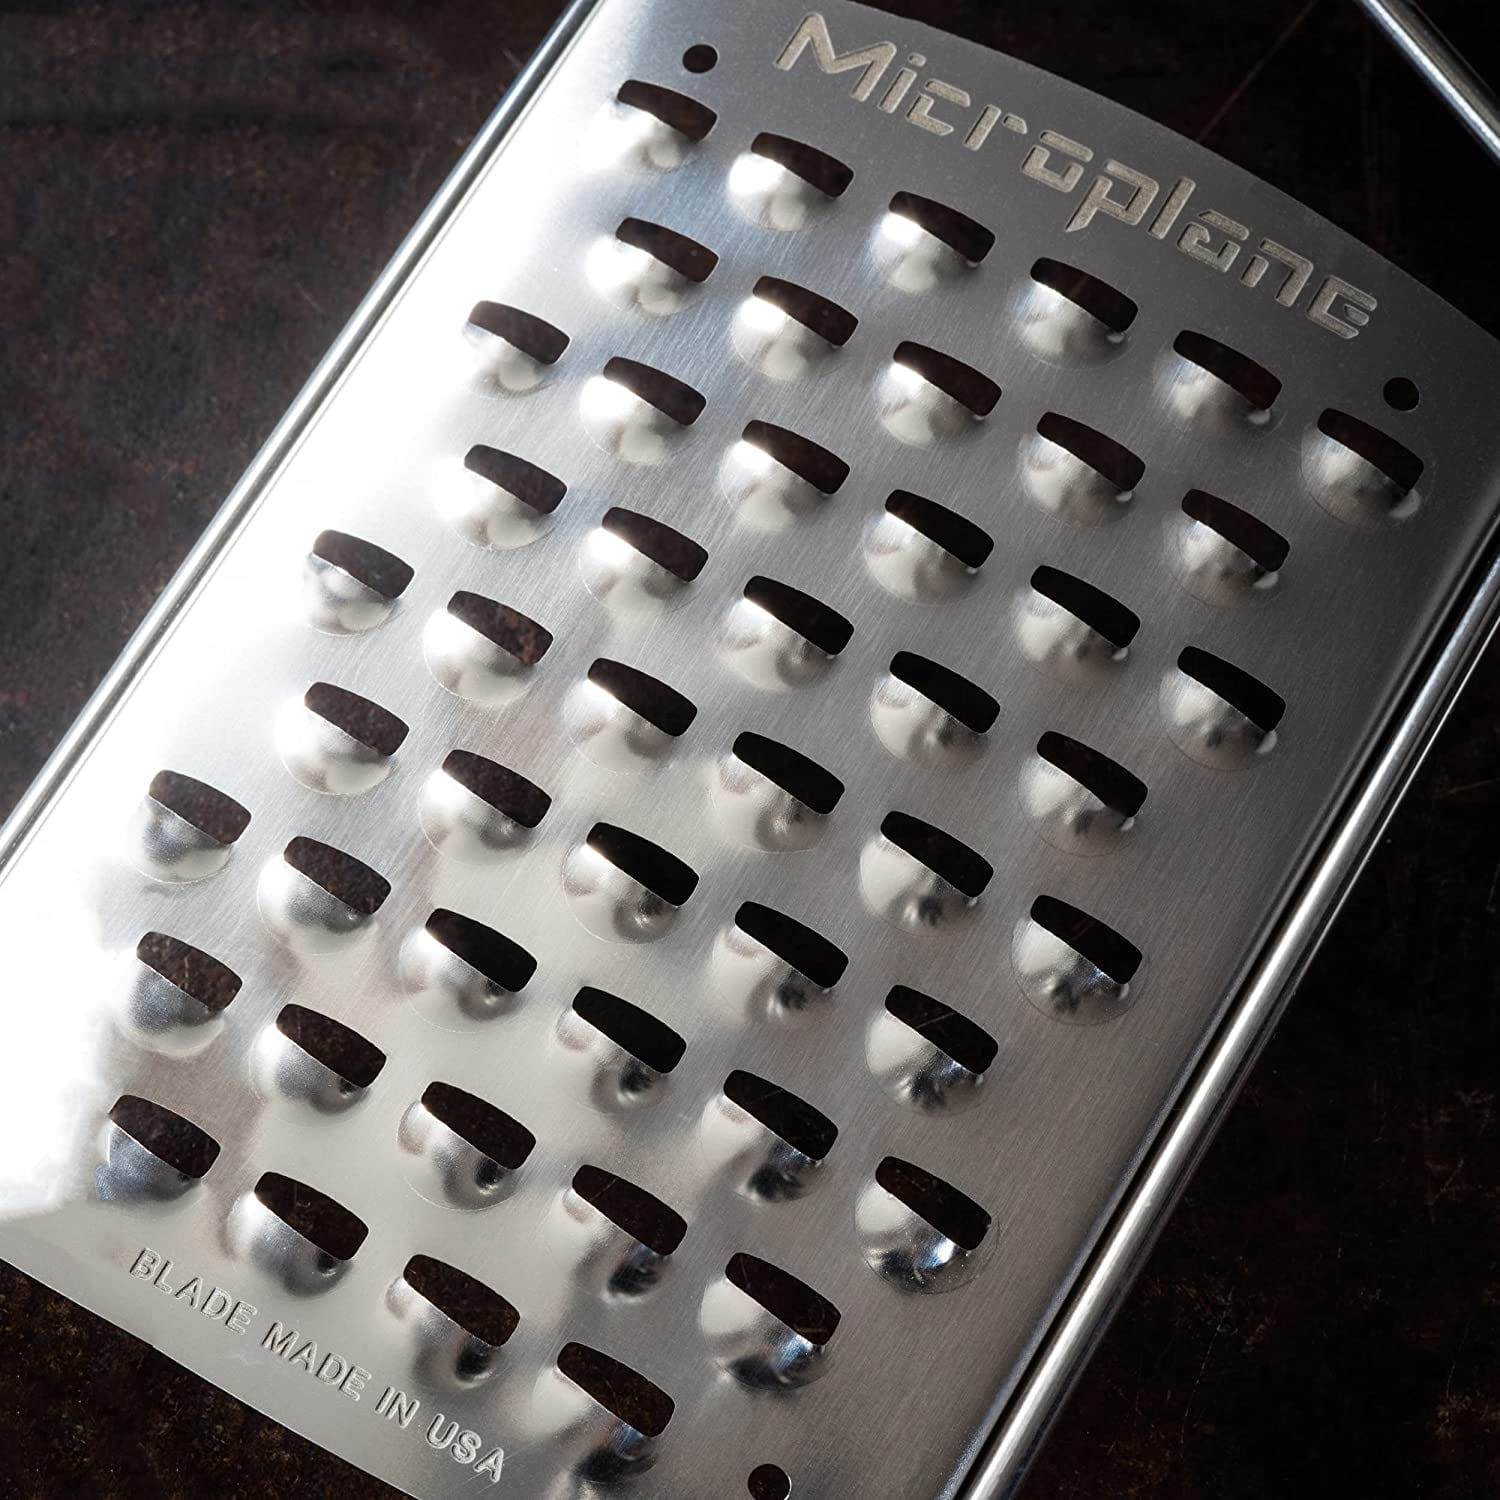 Microplane Gourmet Series Extra Coarse Grater ~ 45008